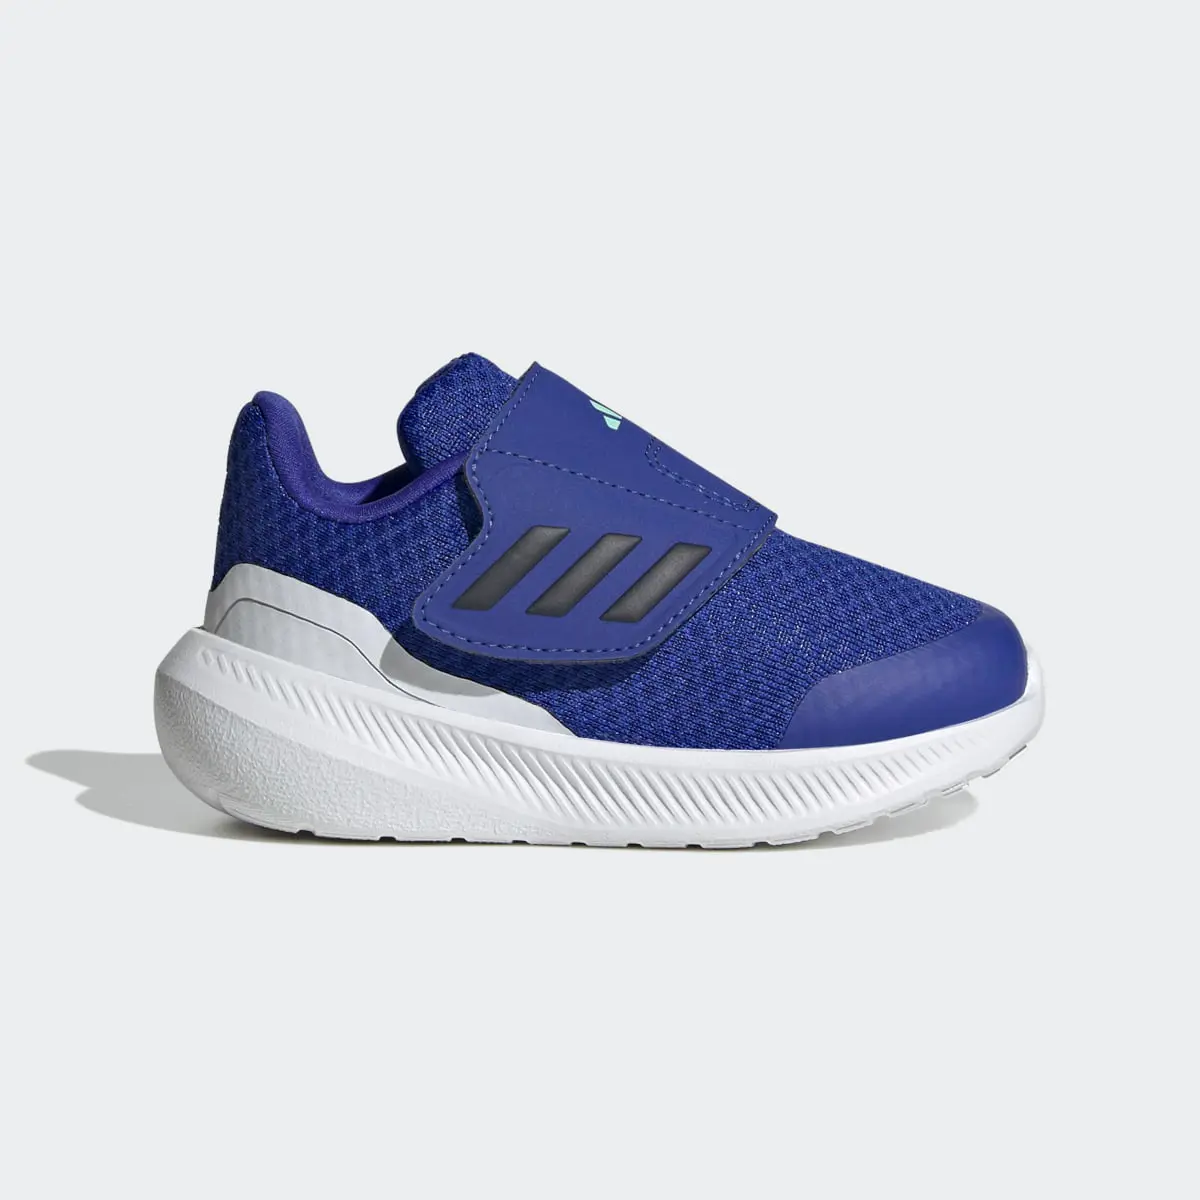 Adidas Runfalcon 3.0 Sport Running Hook-and-Loop Shoes. 2